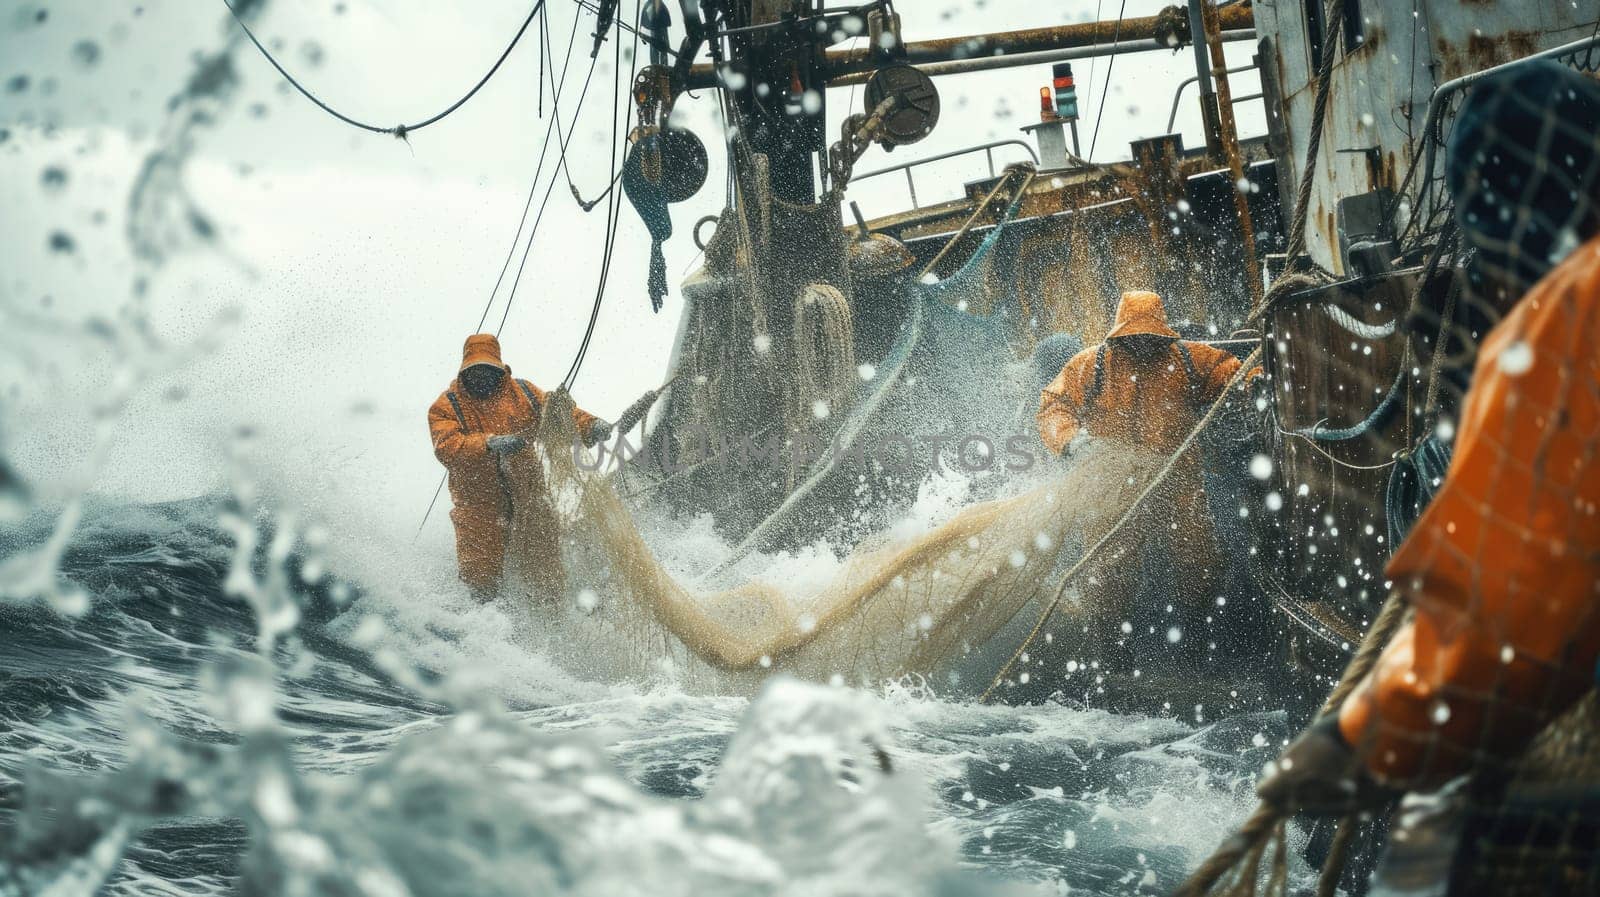 A rugged fishing boat cuts through turbulent ocean waves under a dramatic overcast sky, showcasing the resilience of maritime workers. AIG41